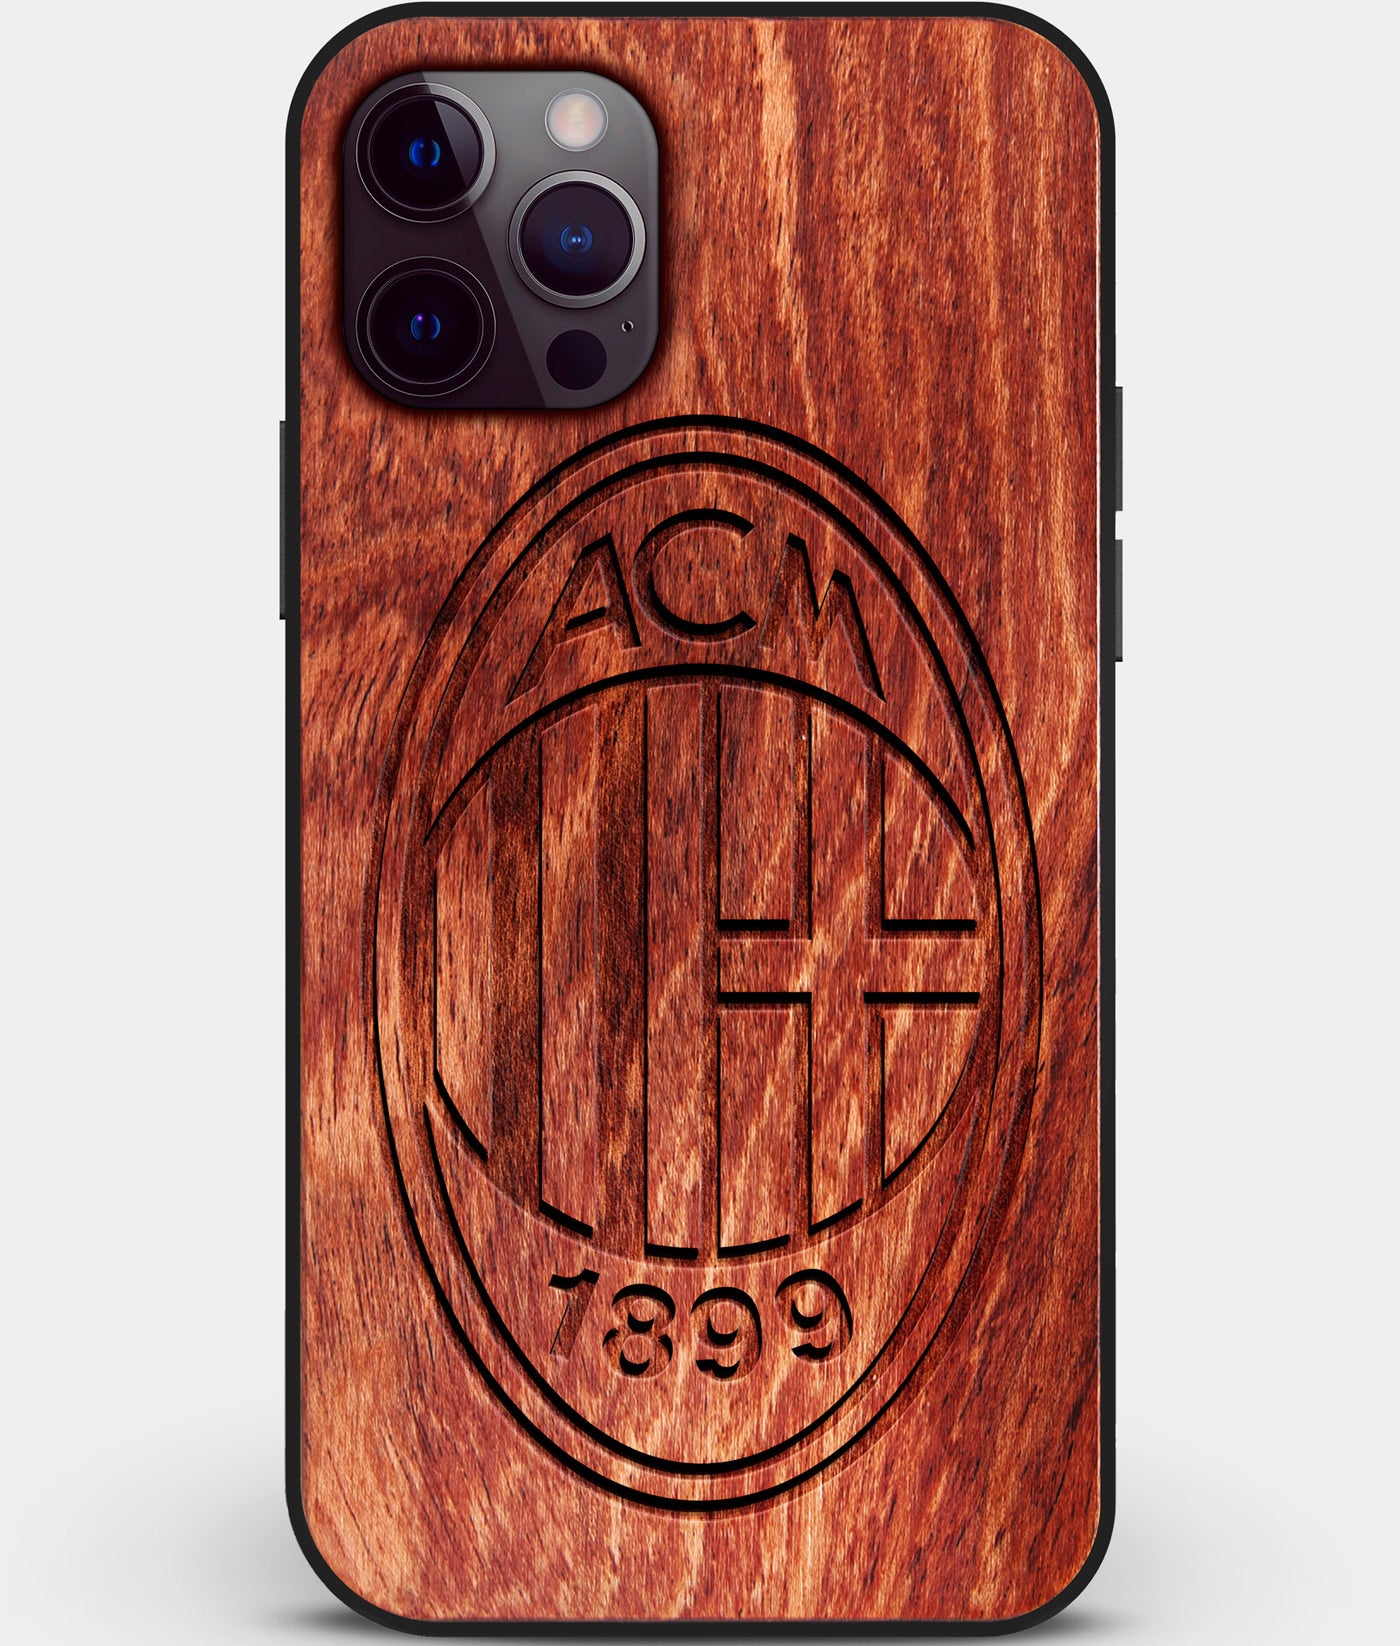 Custom Carved Wood A.C. Milan iPhone 12 Pro Max Case | Personalized Mahogany Wood A.C. Milan Cover, Birthday Gift, Gifts For Him, Monogrammed Gift For Fan | by Engraved In Nature